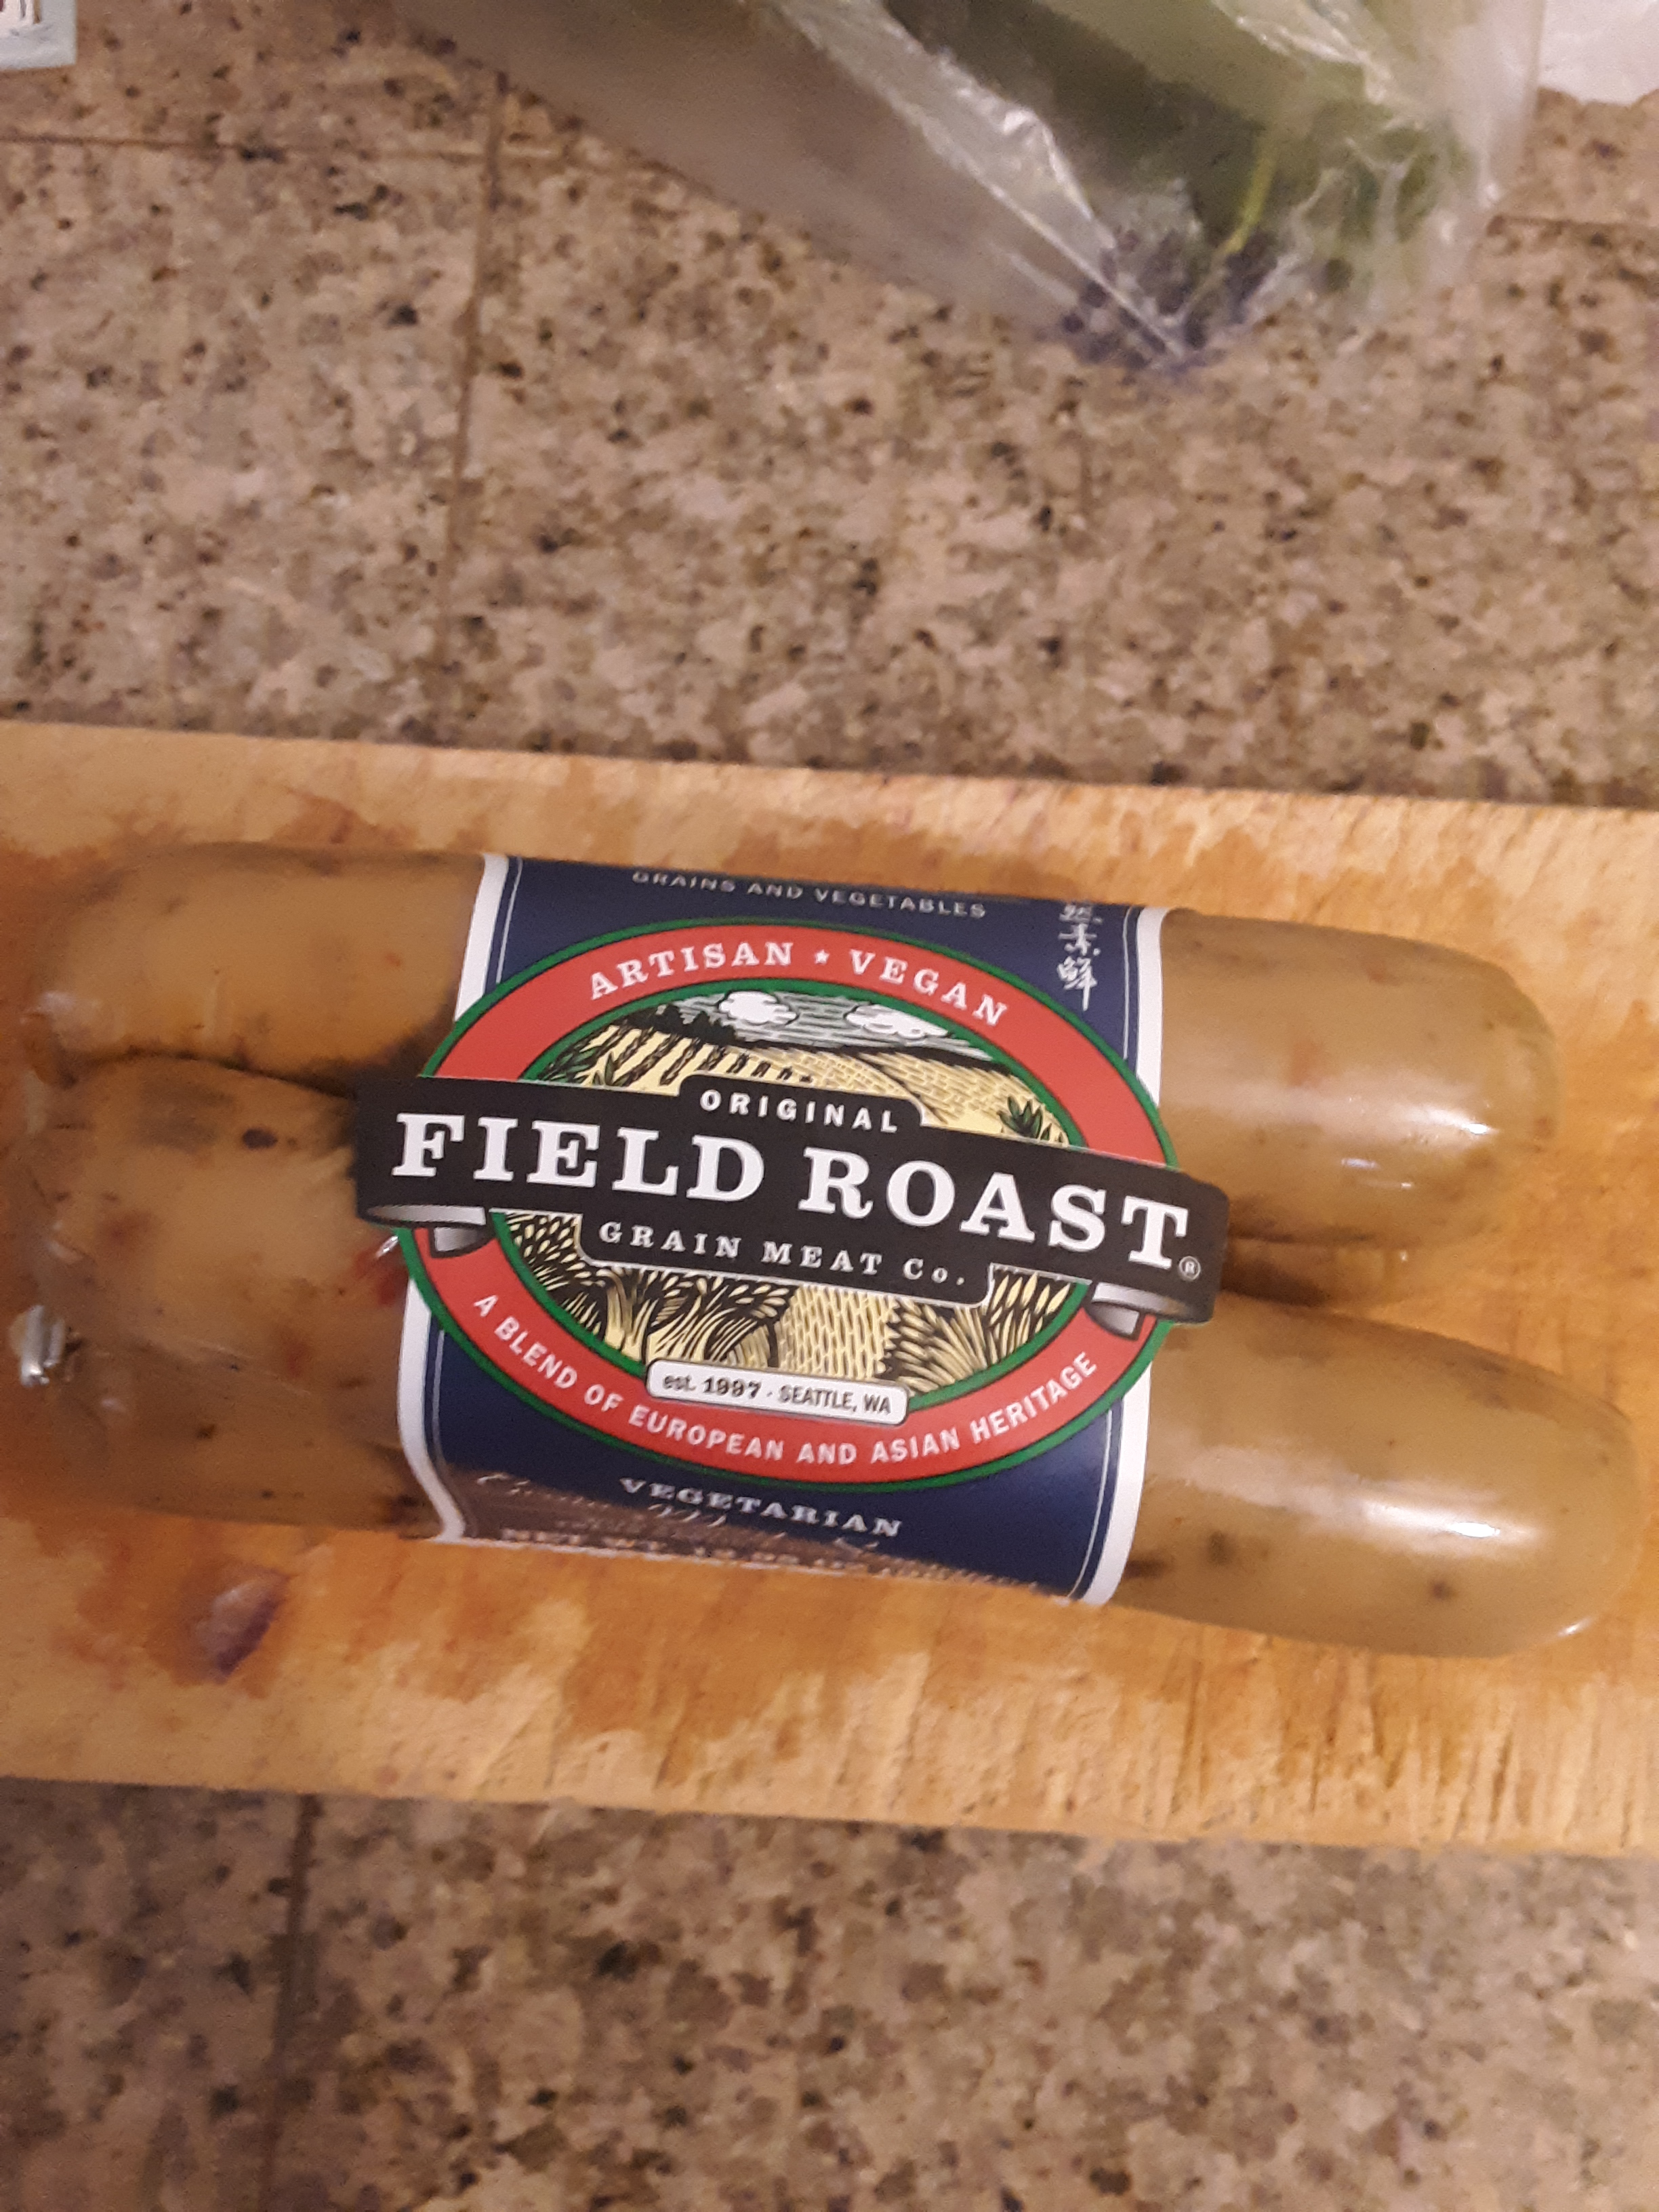 Living well in the 21st century - Limassol, Cyprus - a picture of field roast grain meat co. - est. 1997 - Seattle, WA - the label is blue, red and white. Sausage is wrapped in casing, and the label is wrapped around the sausage.  